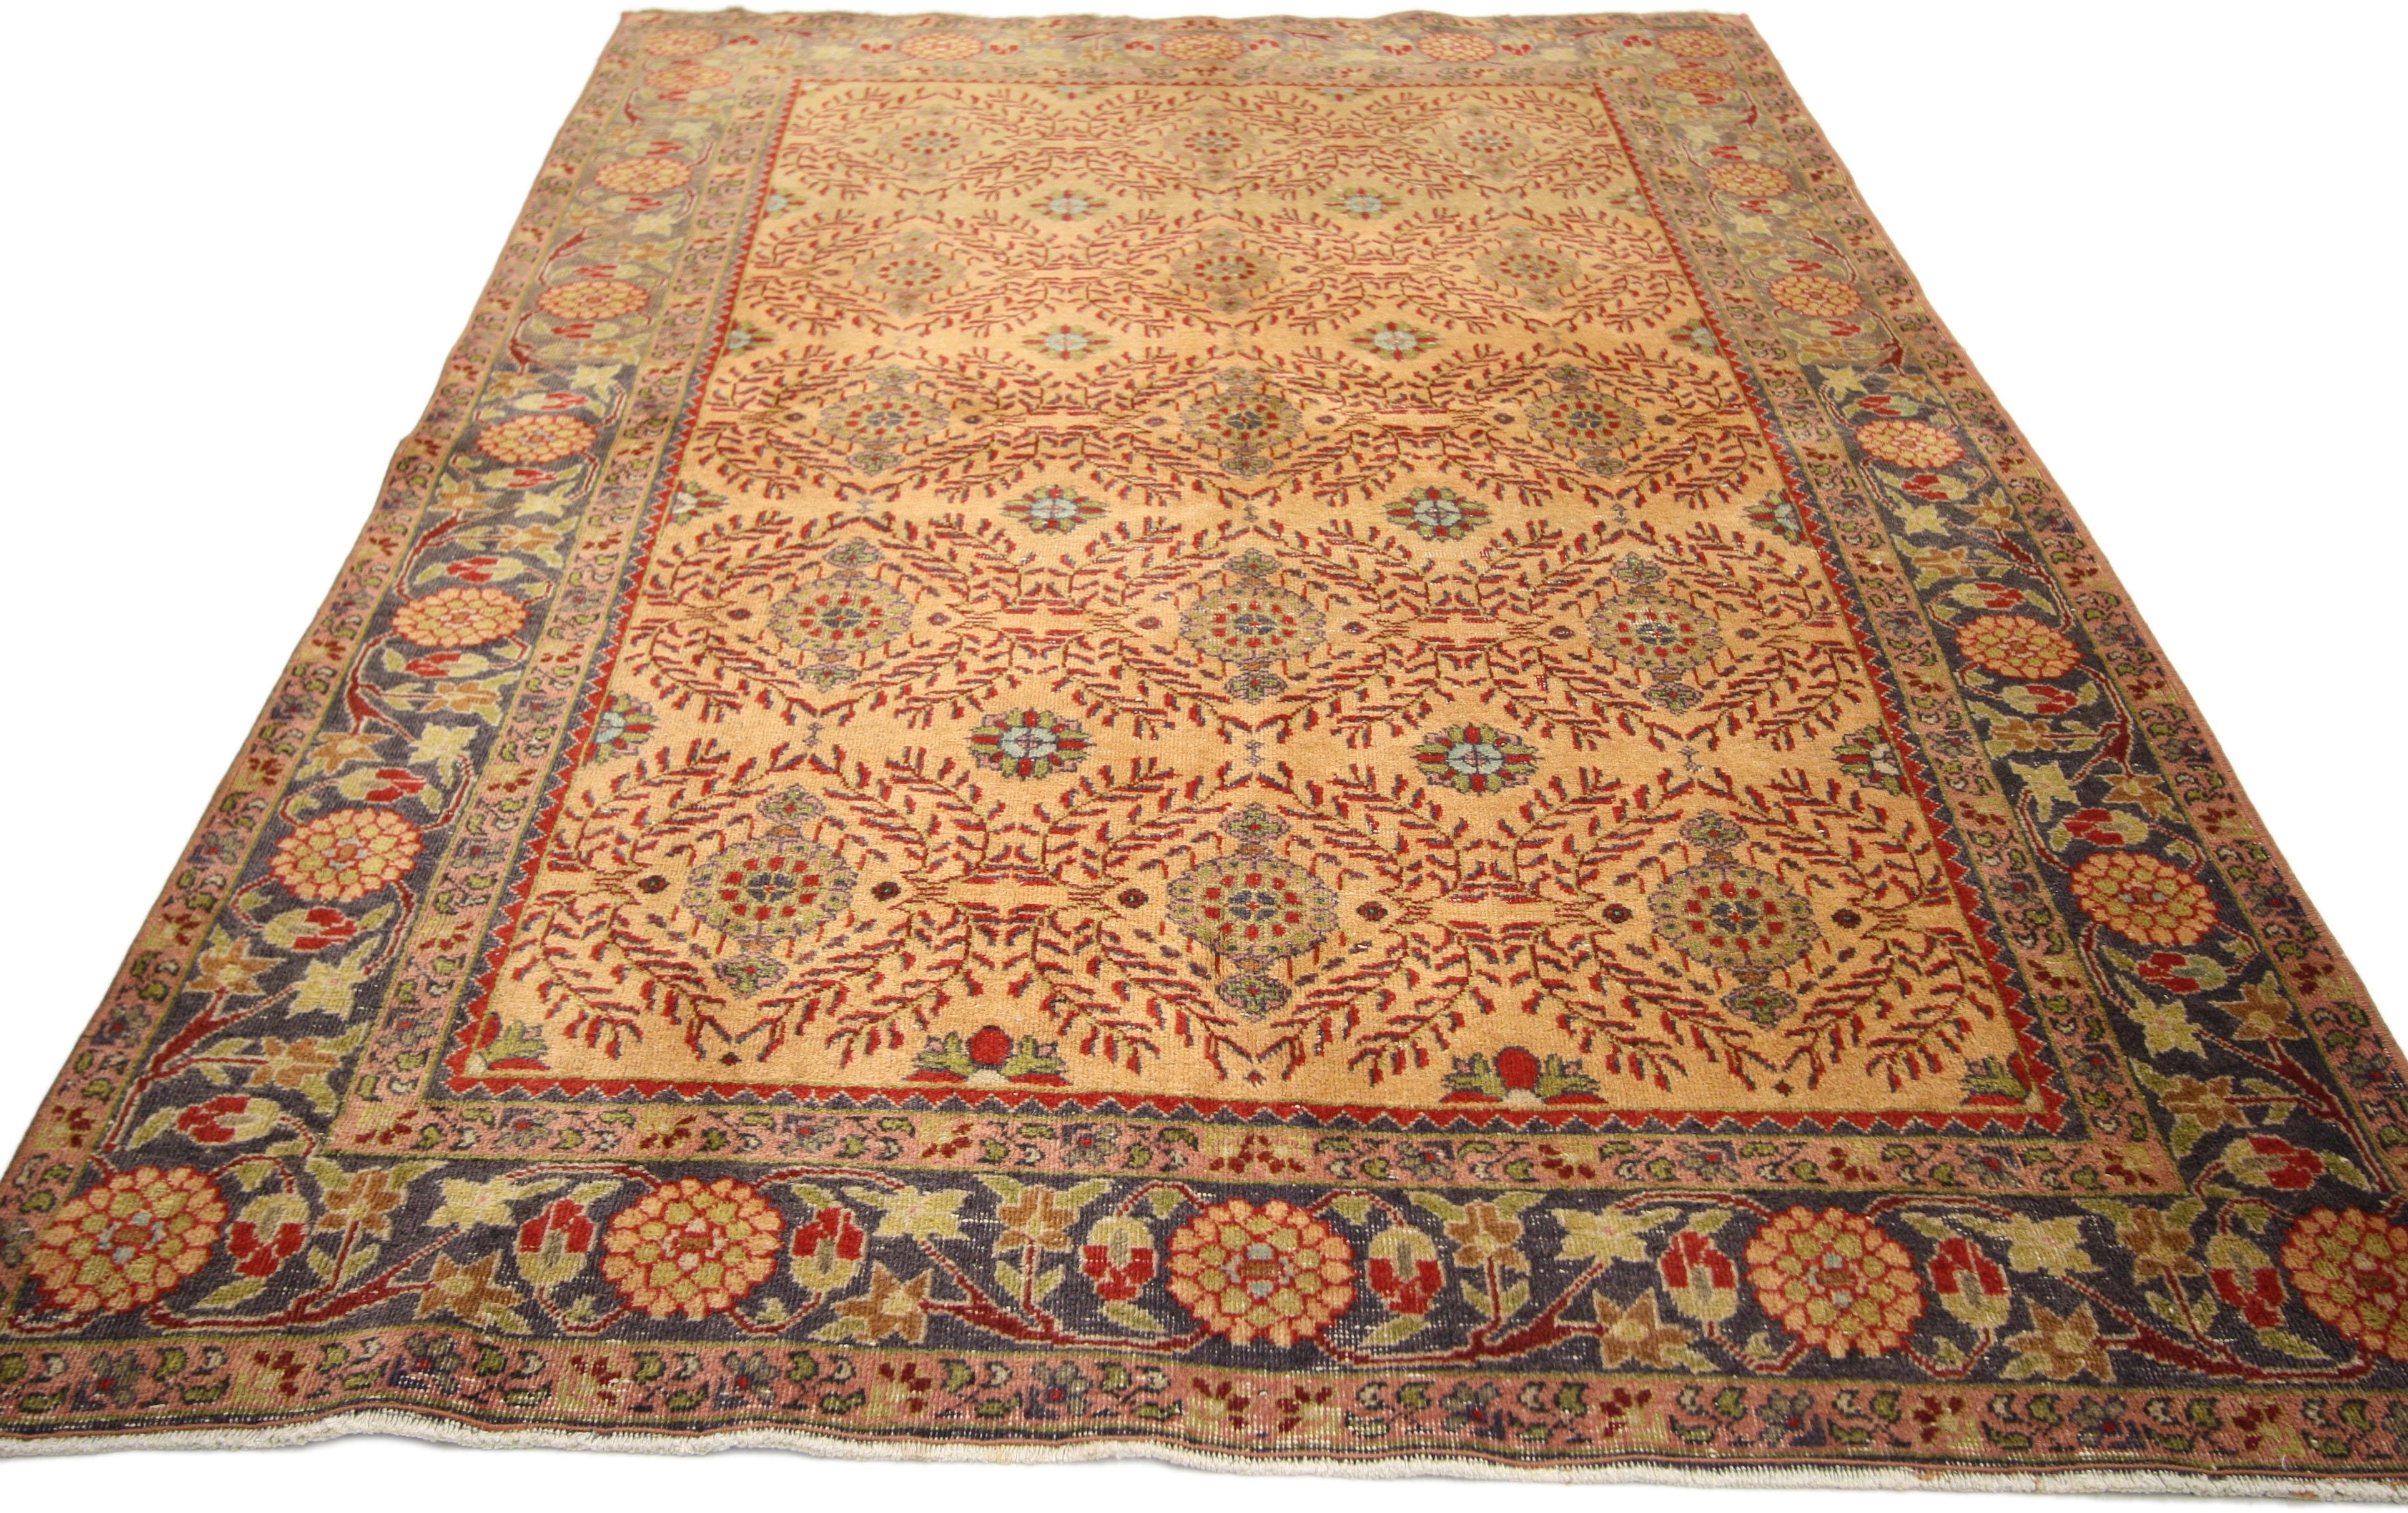 52336, vintage Turkish Oushak rug with Spanish style. This hand knotted vintage Turkish Oushak rug with Spanish style features an all-over repeating pattern of lobed orbs with pendants set in an angular lattice of red leafy tendrils. Rich and